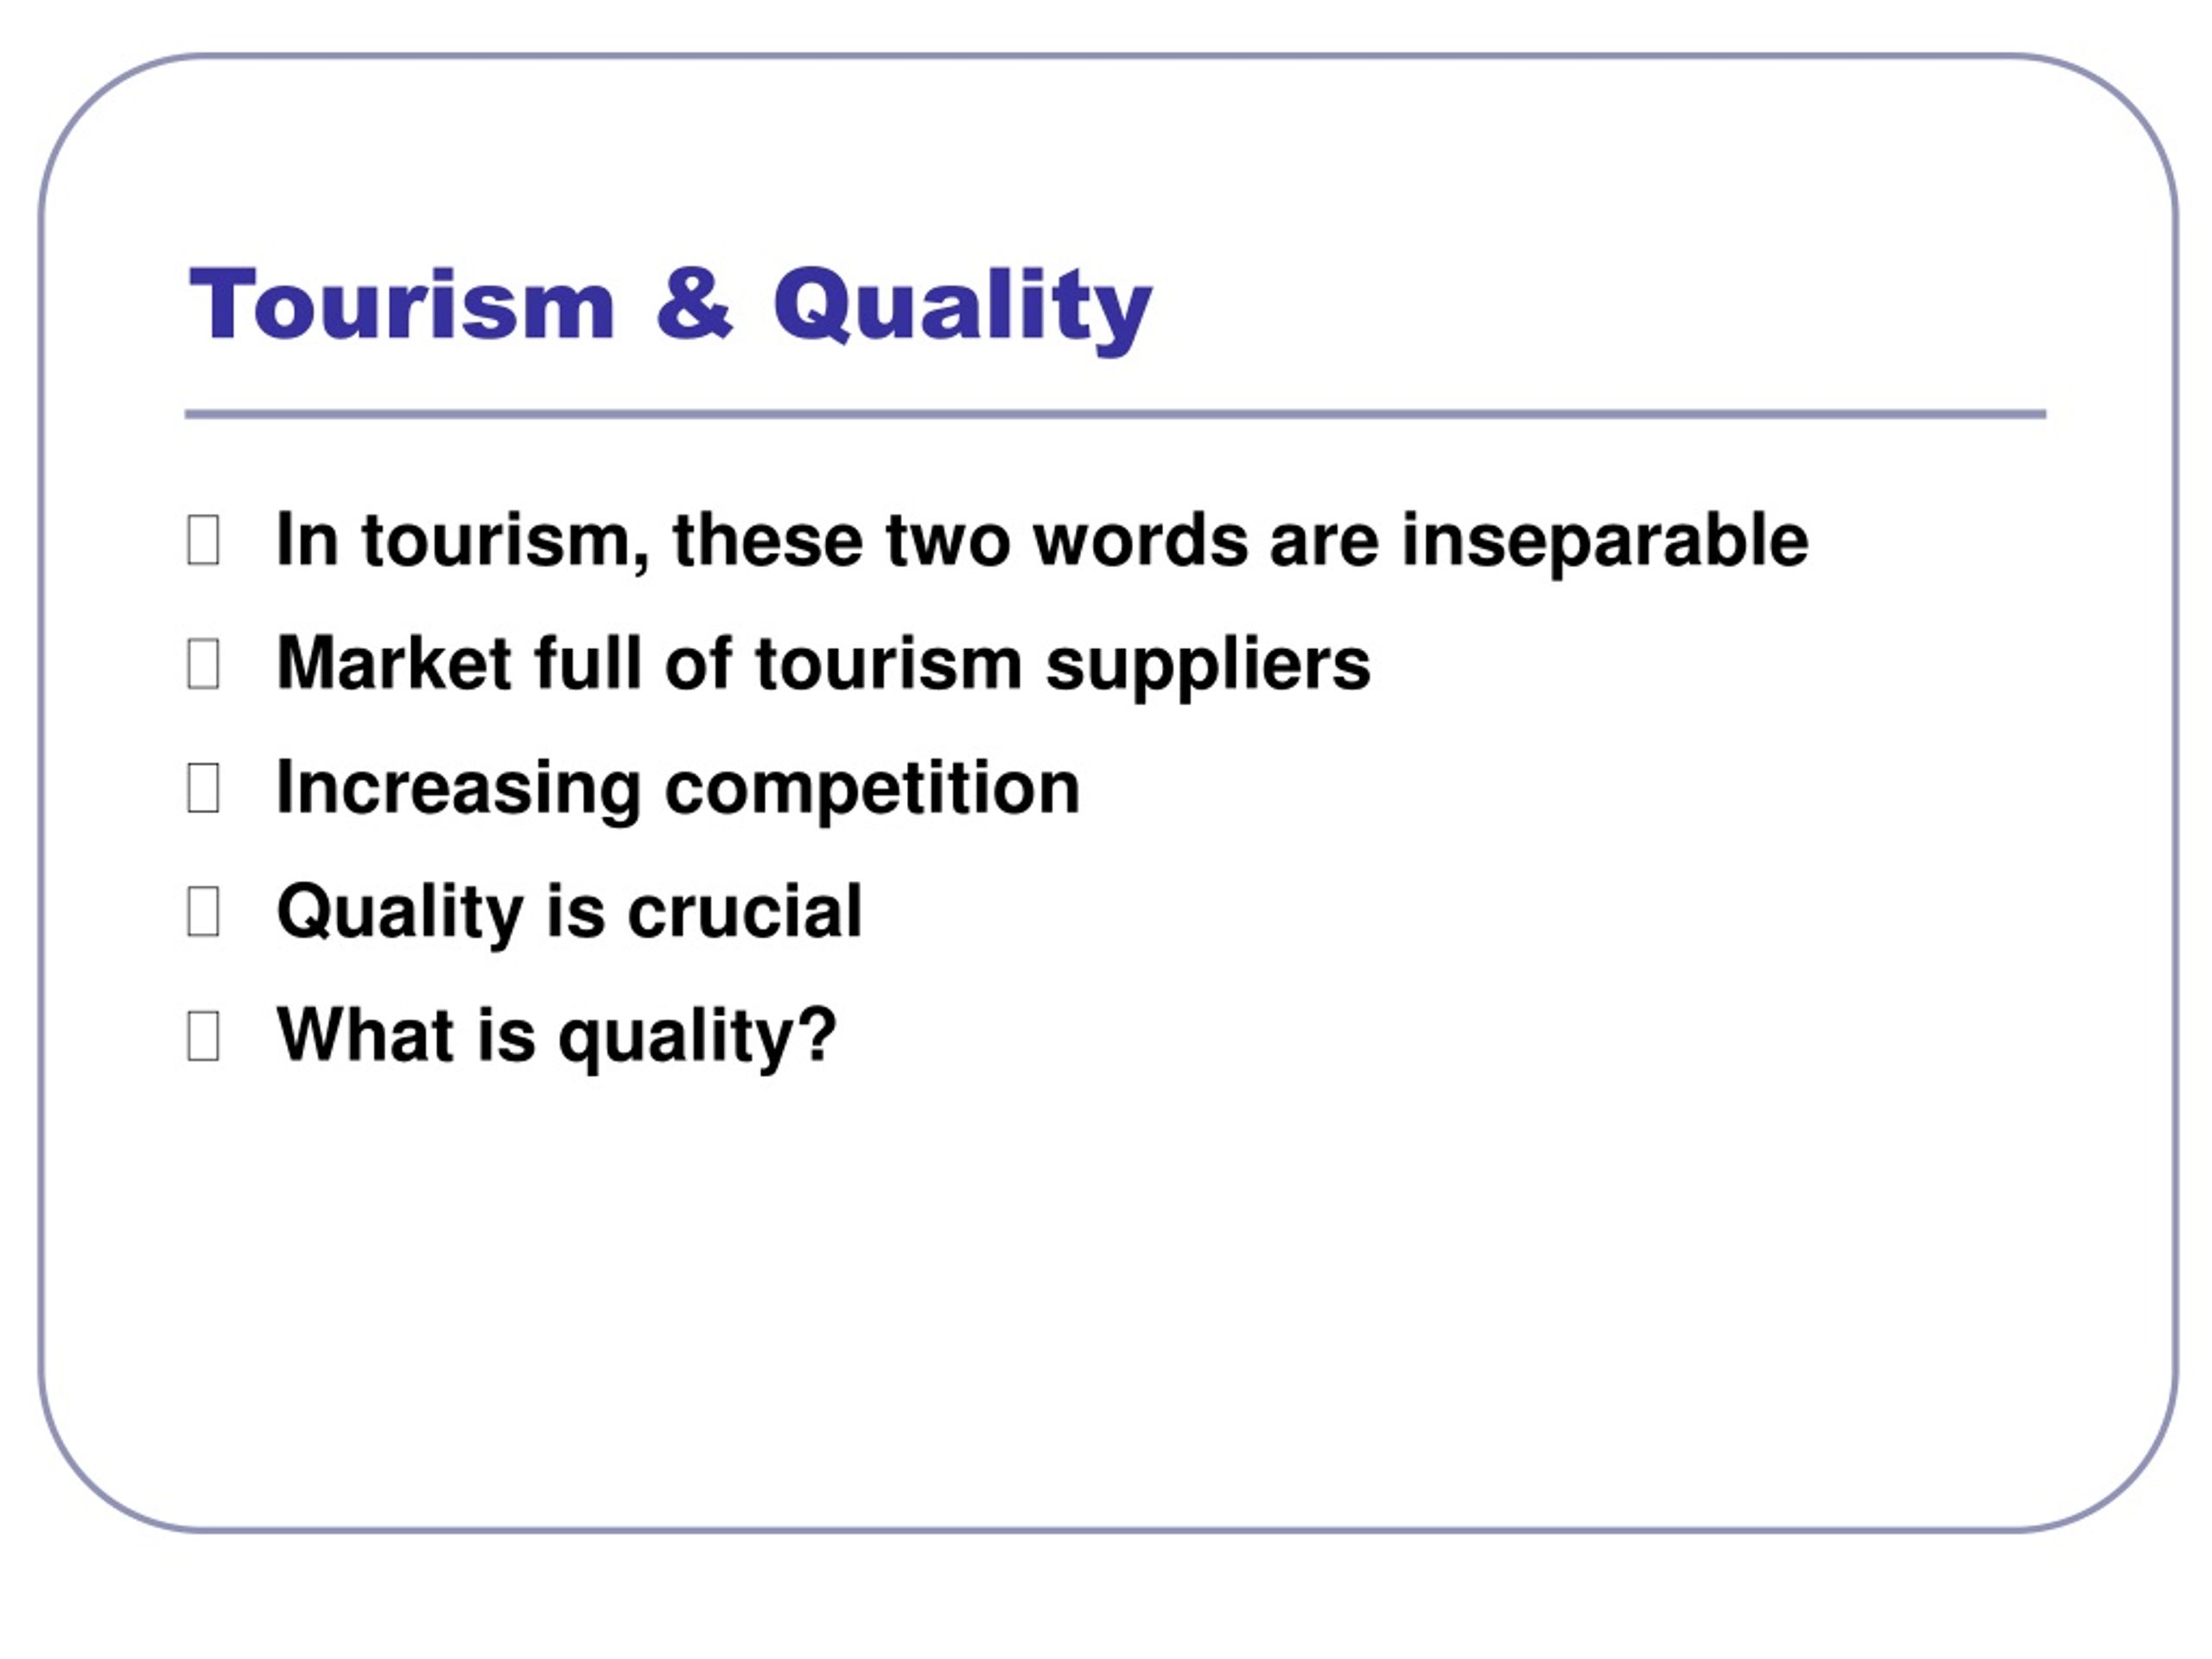 what is quality in tourism